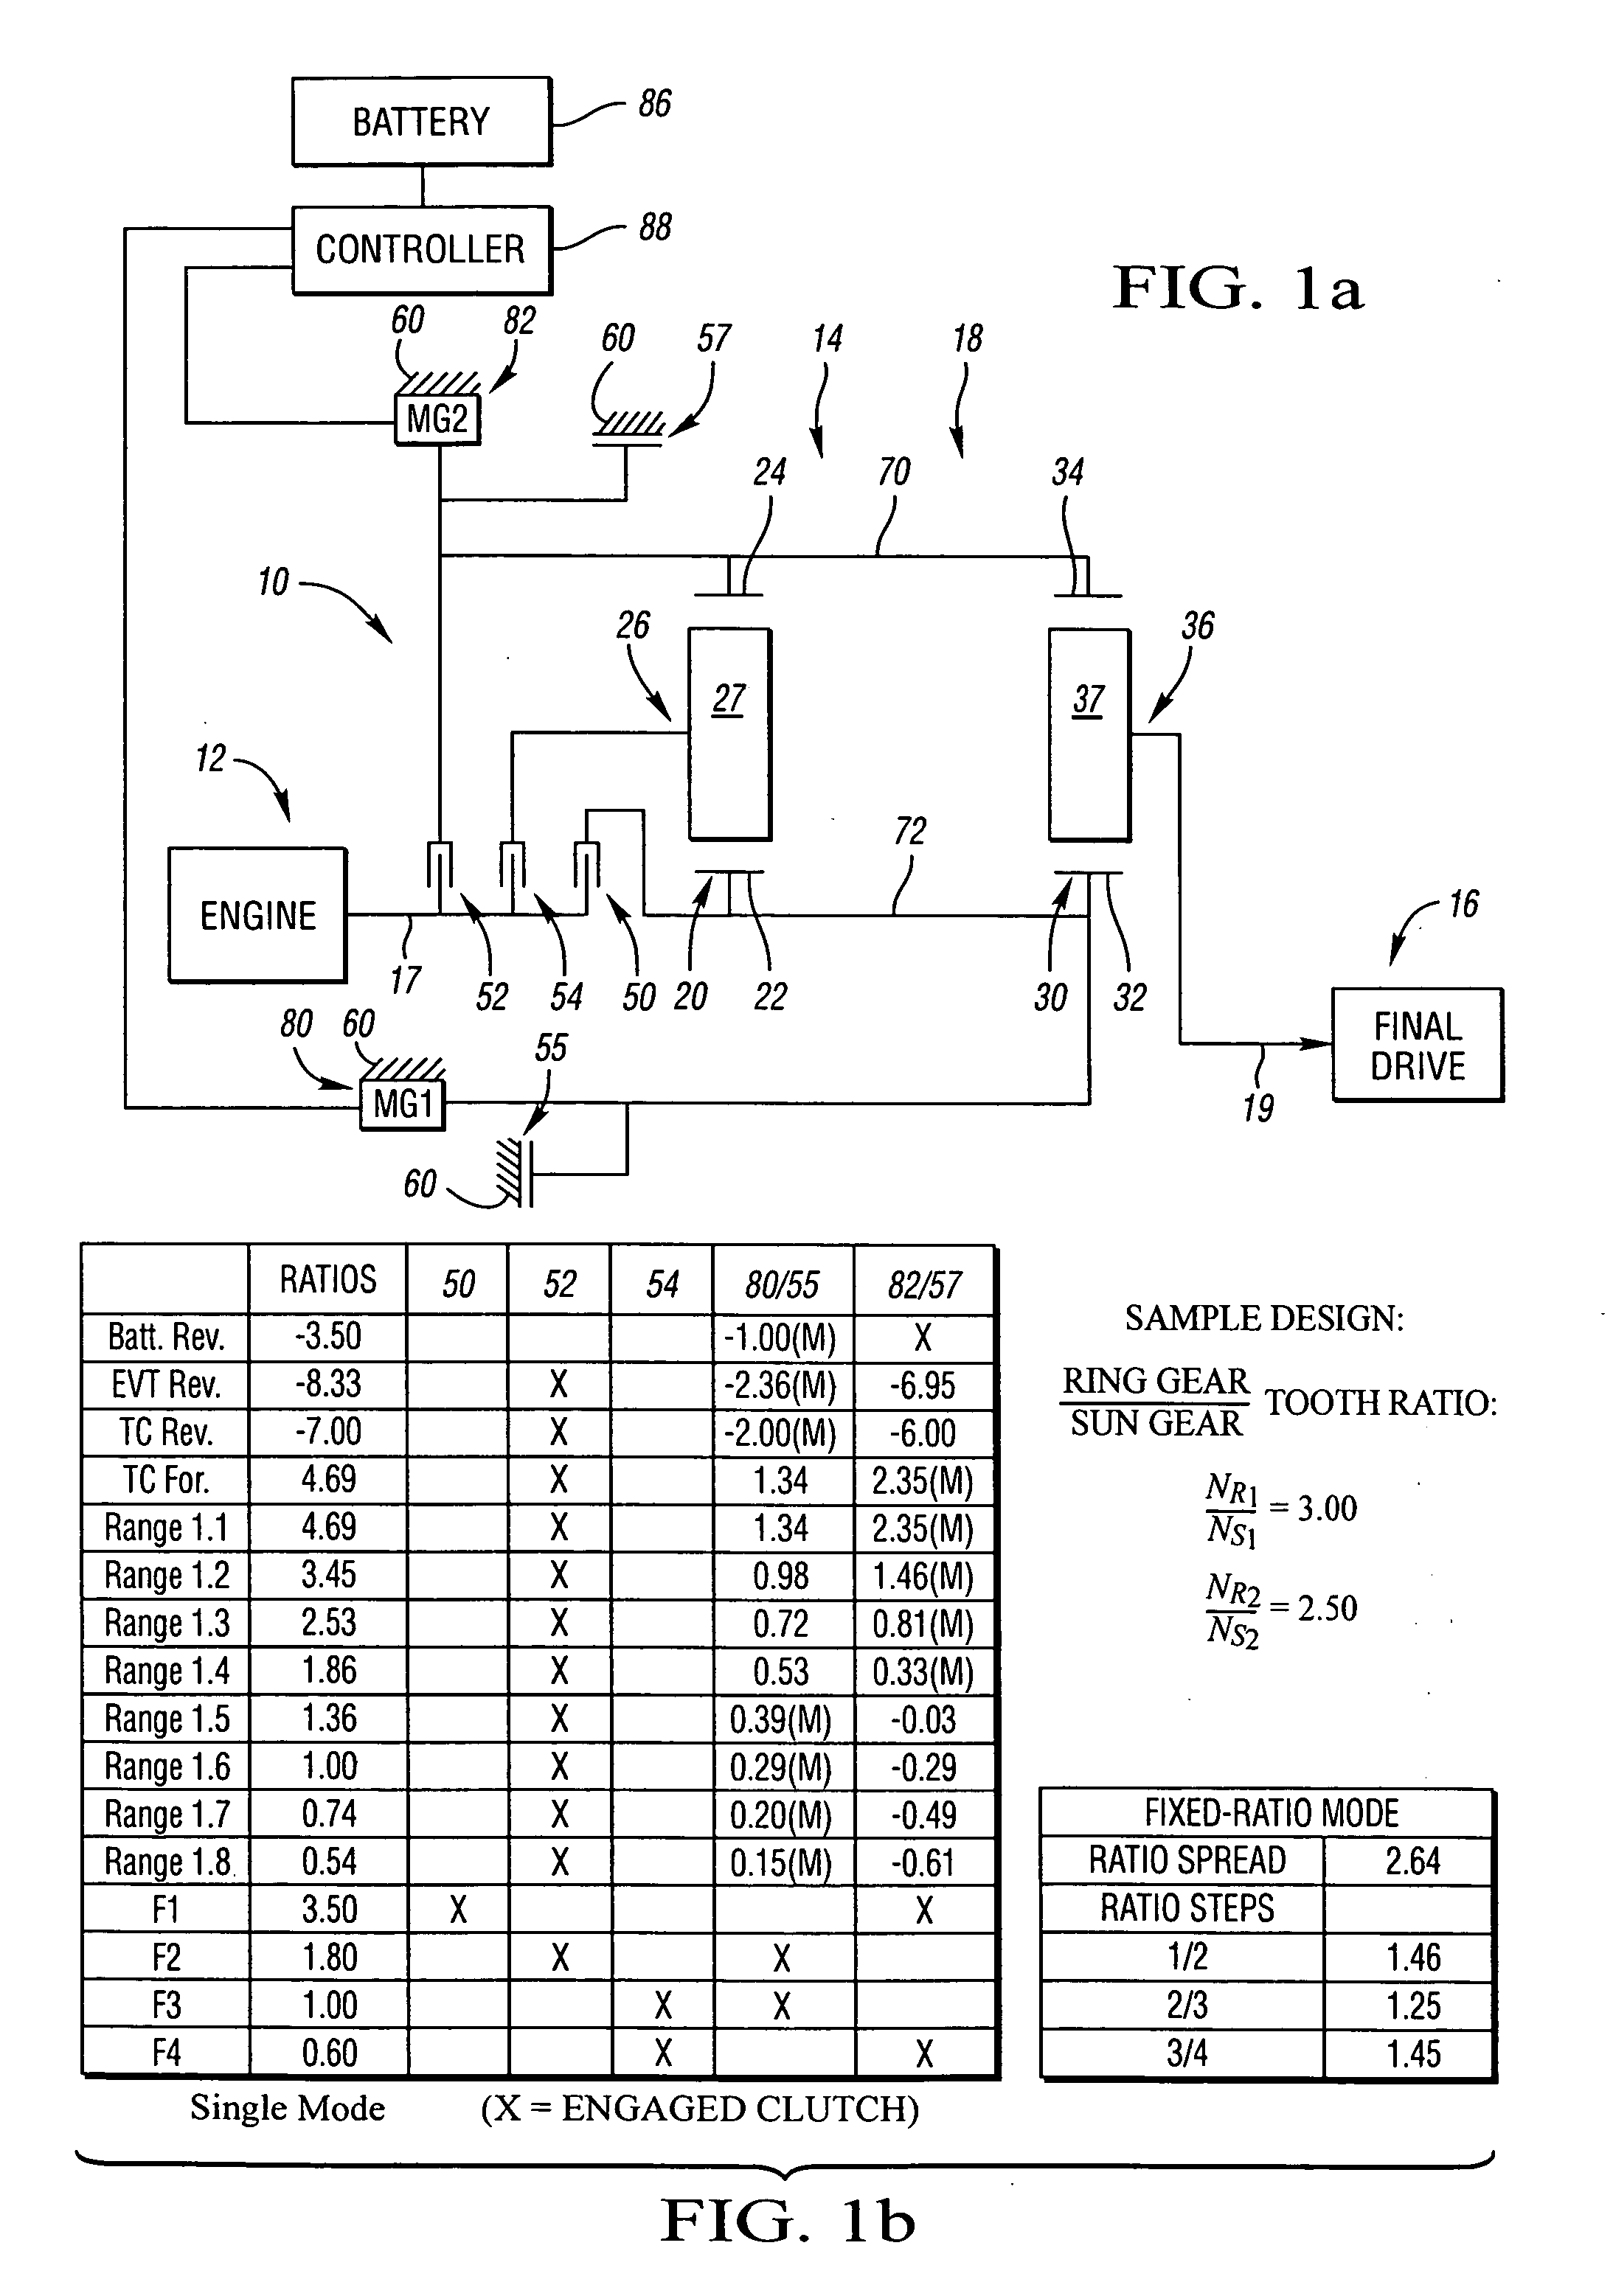 Electrically variable transmission having two planetary gear sets with two fixed interconnections and clutch input